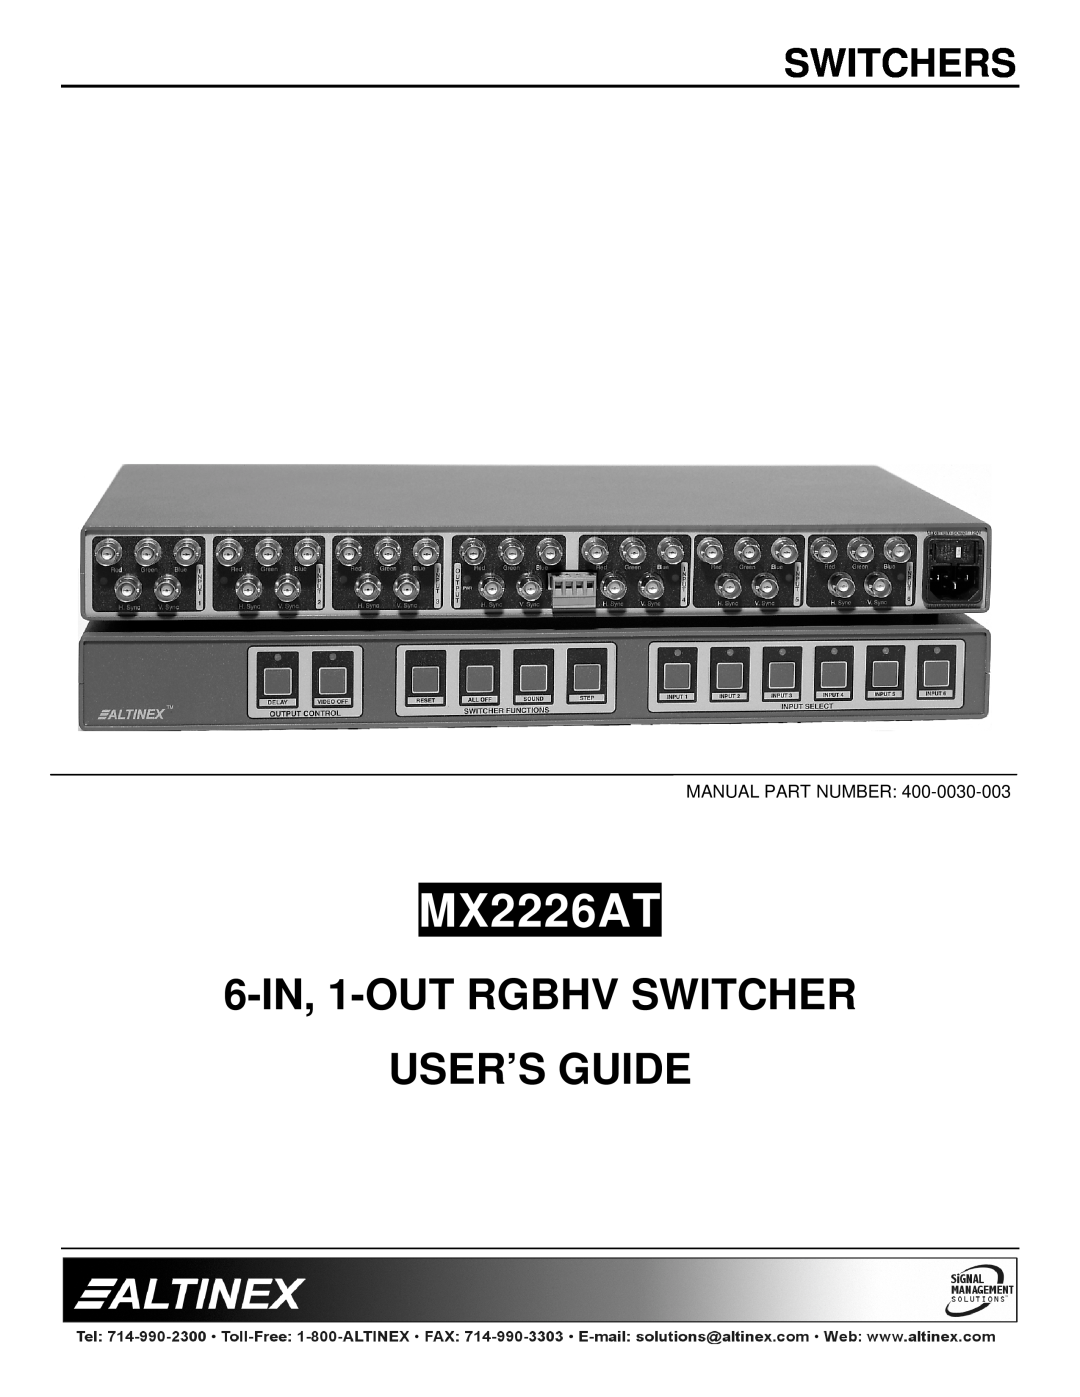 Altinex MX2226AT manual Switchers, 6-IN, 1-OUT RGBHV SWITCHER USER’S GUIDE 